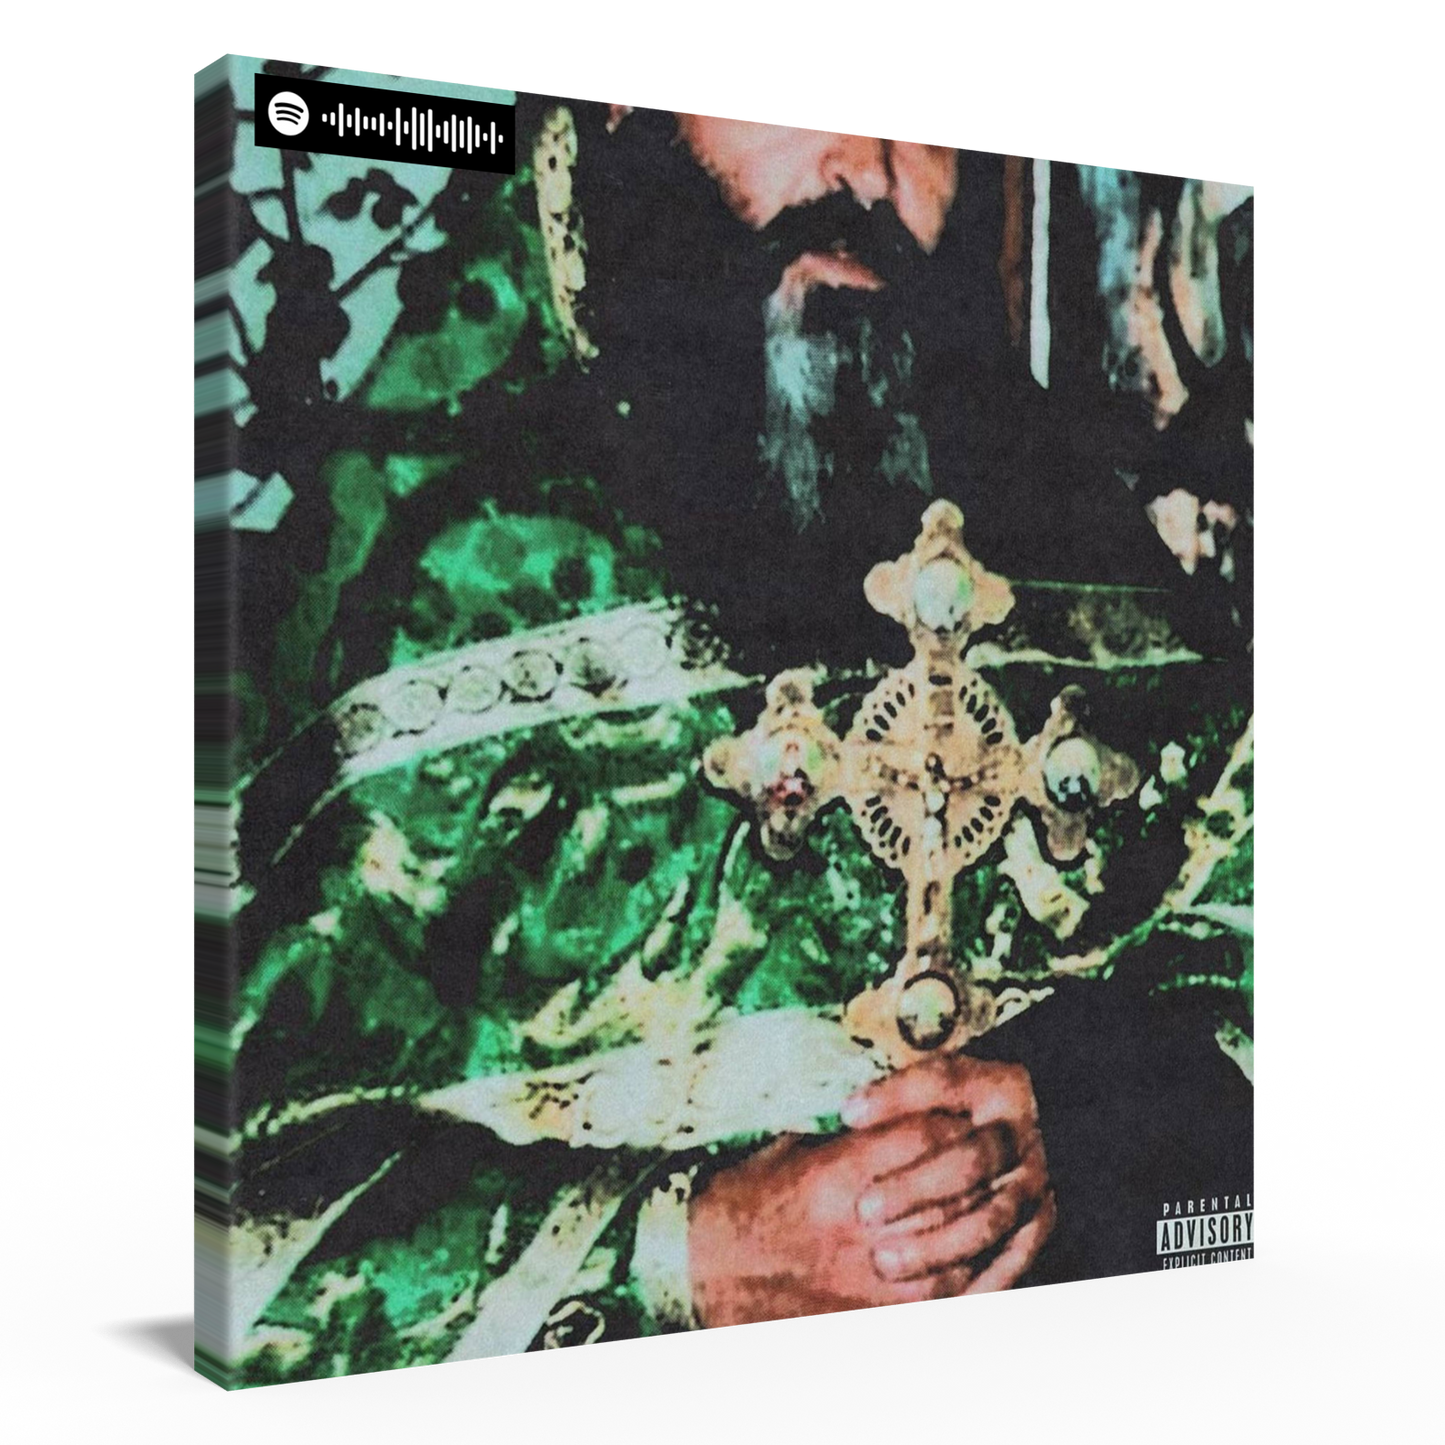 $uicideboy$ - Sing Me a Lullaby, My Sweet Temptation Album Canvas